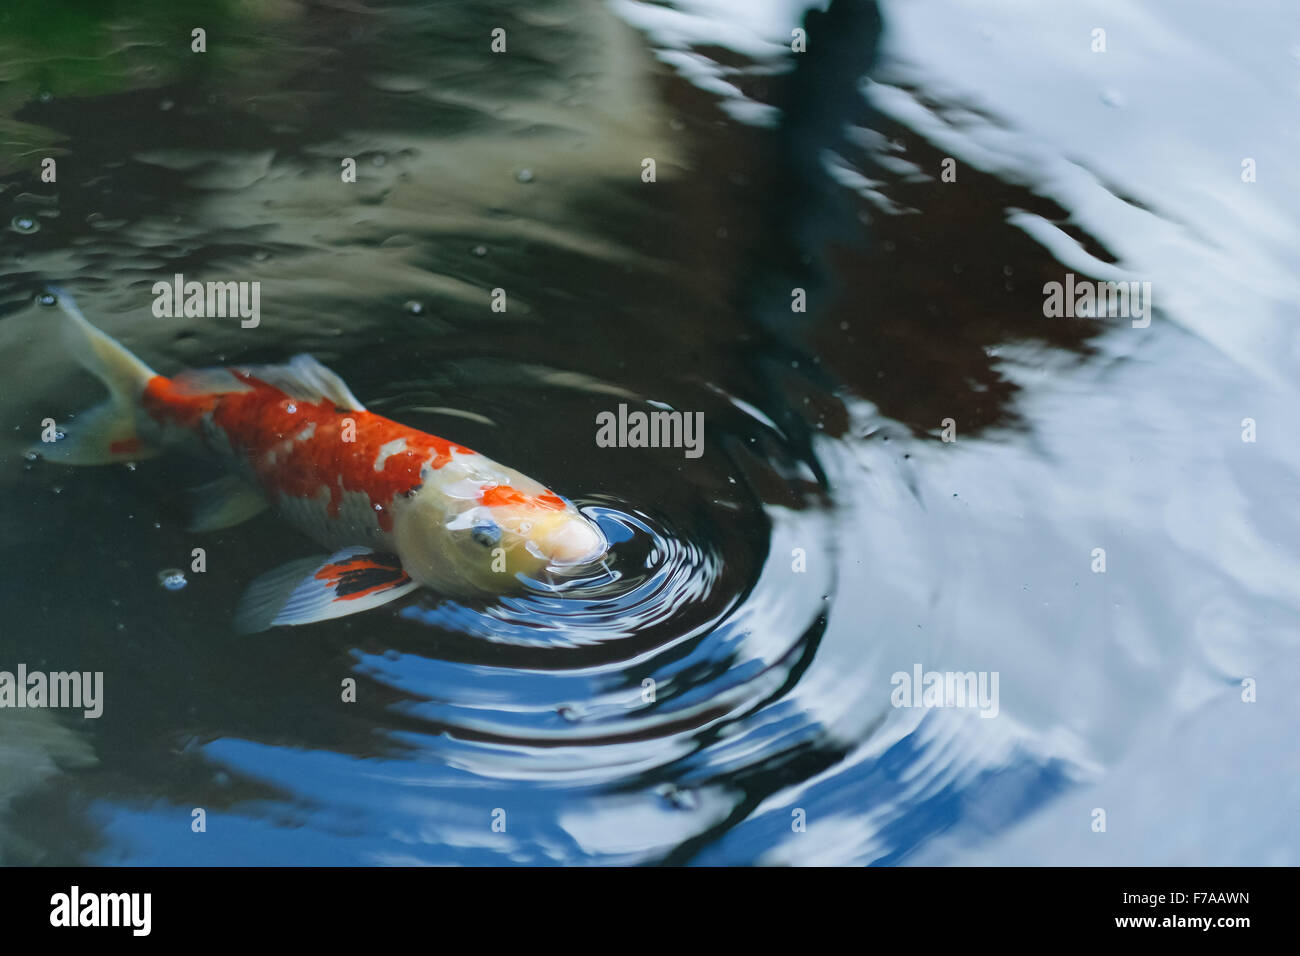 Fancy carp fish breathing on the pool's surface Stock Photo